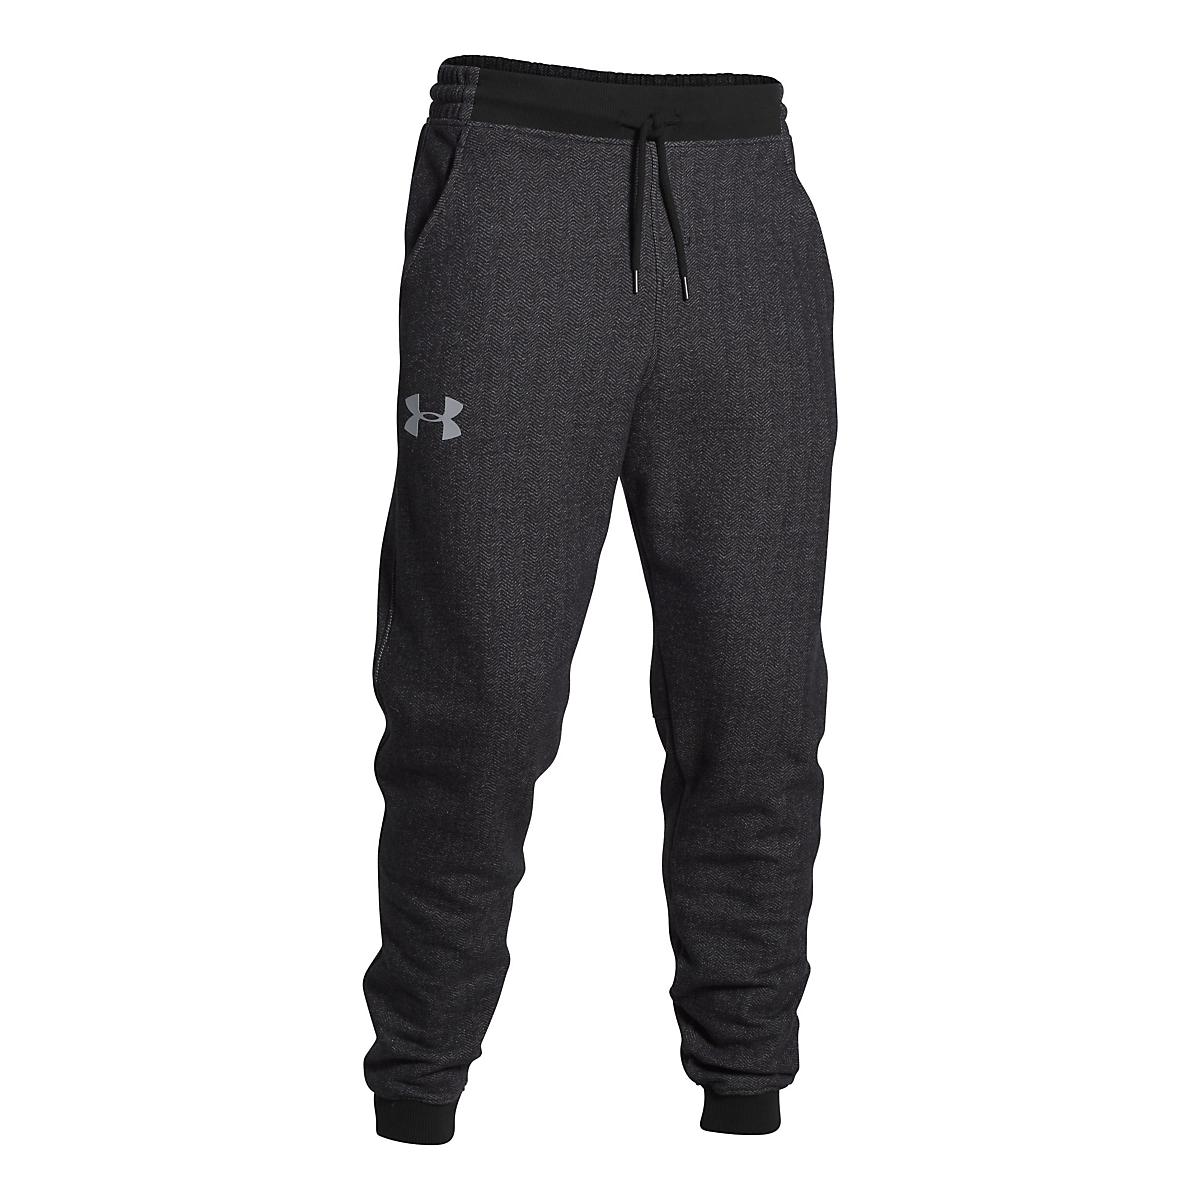 Mens Under Armour Rival Cotton Novelty Jogger Full Length Pants at Road ...